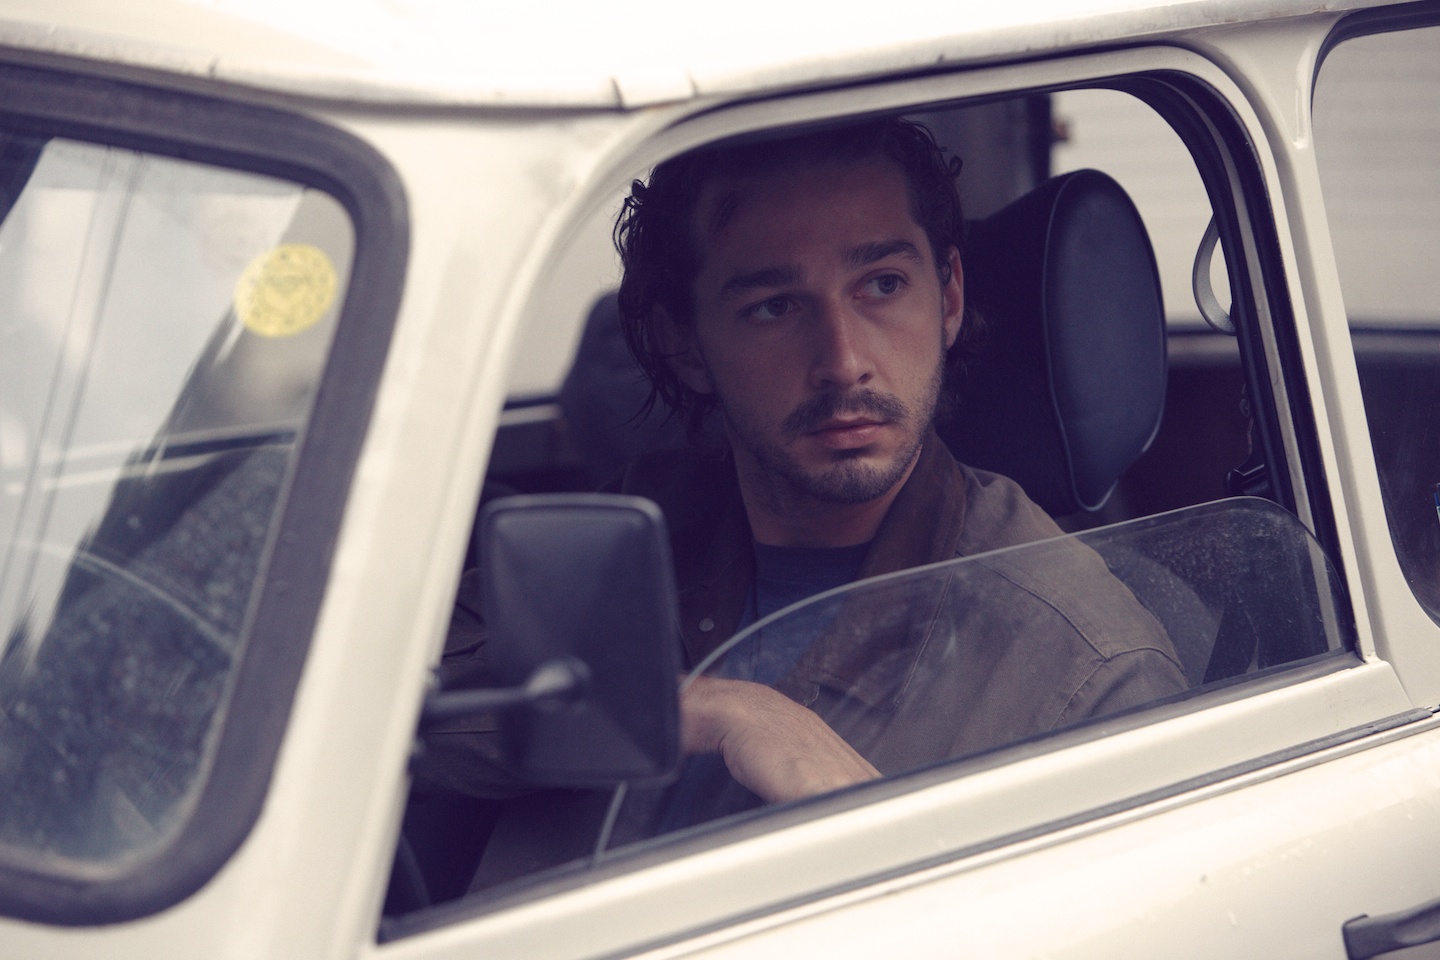 Still of Shia LaBeouf in The Necessary Death of Charlie Countryman (2013)